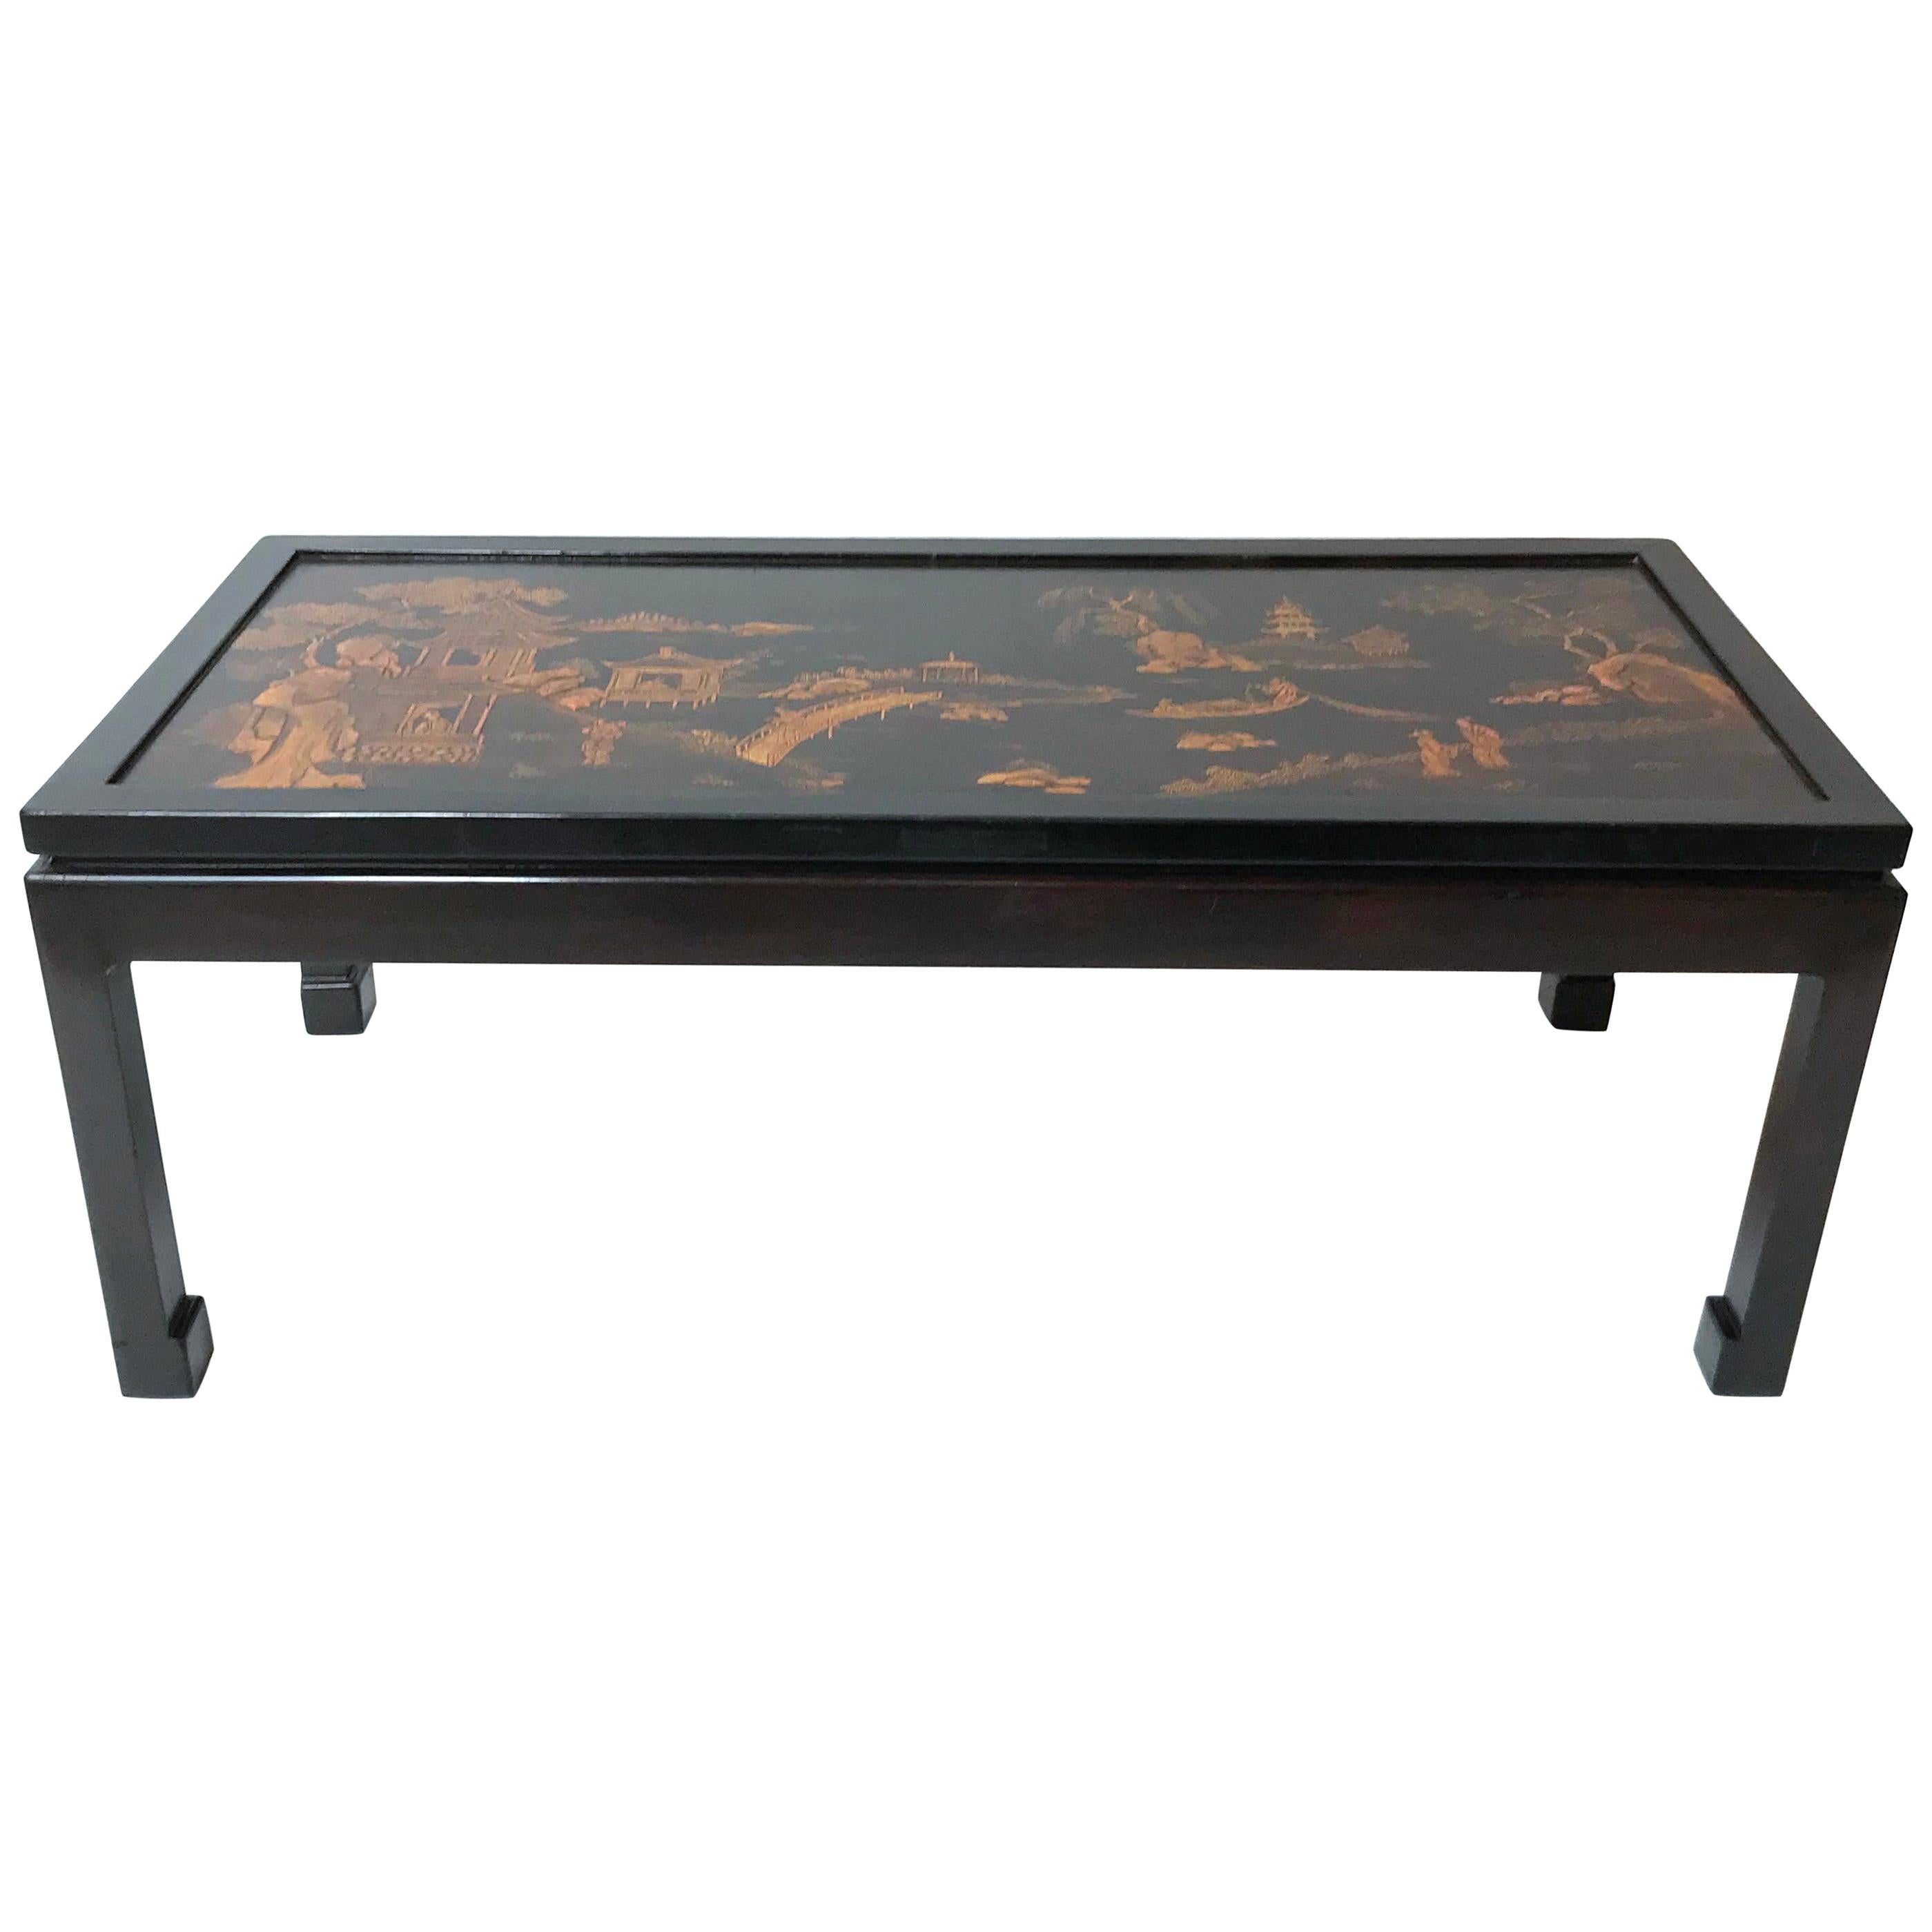 19th Century Chinese Gilt Decorated Lacquer Panel Mounted as a Low Table For Sale